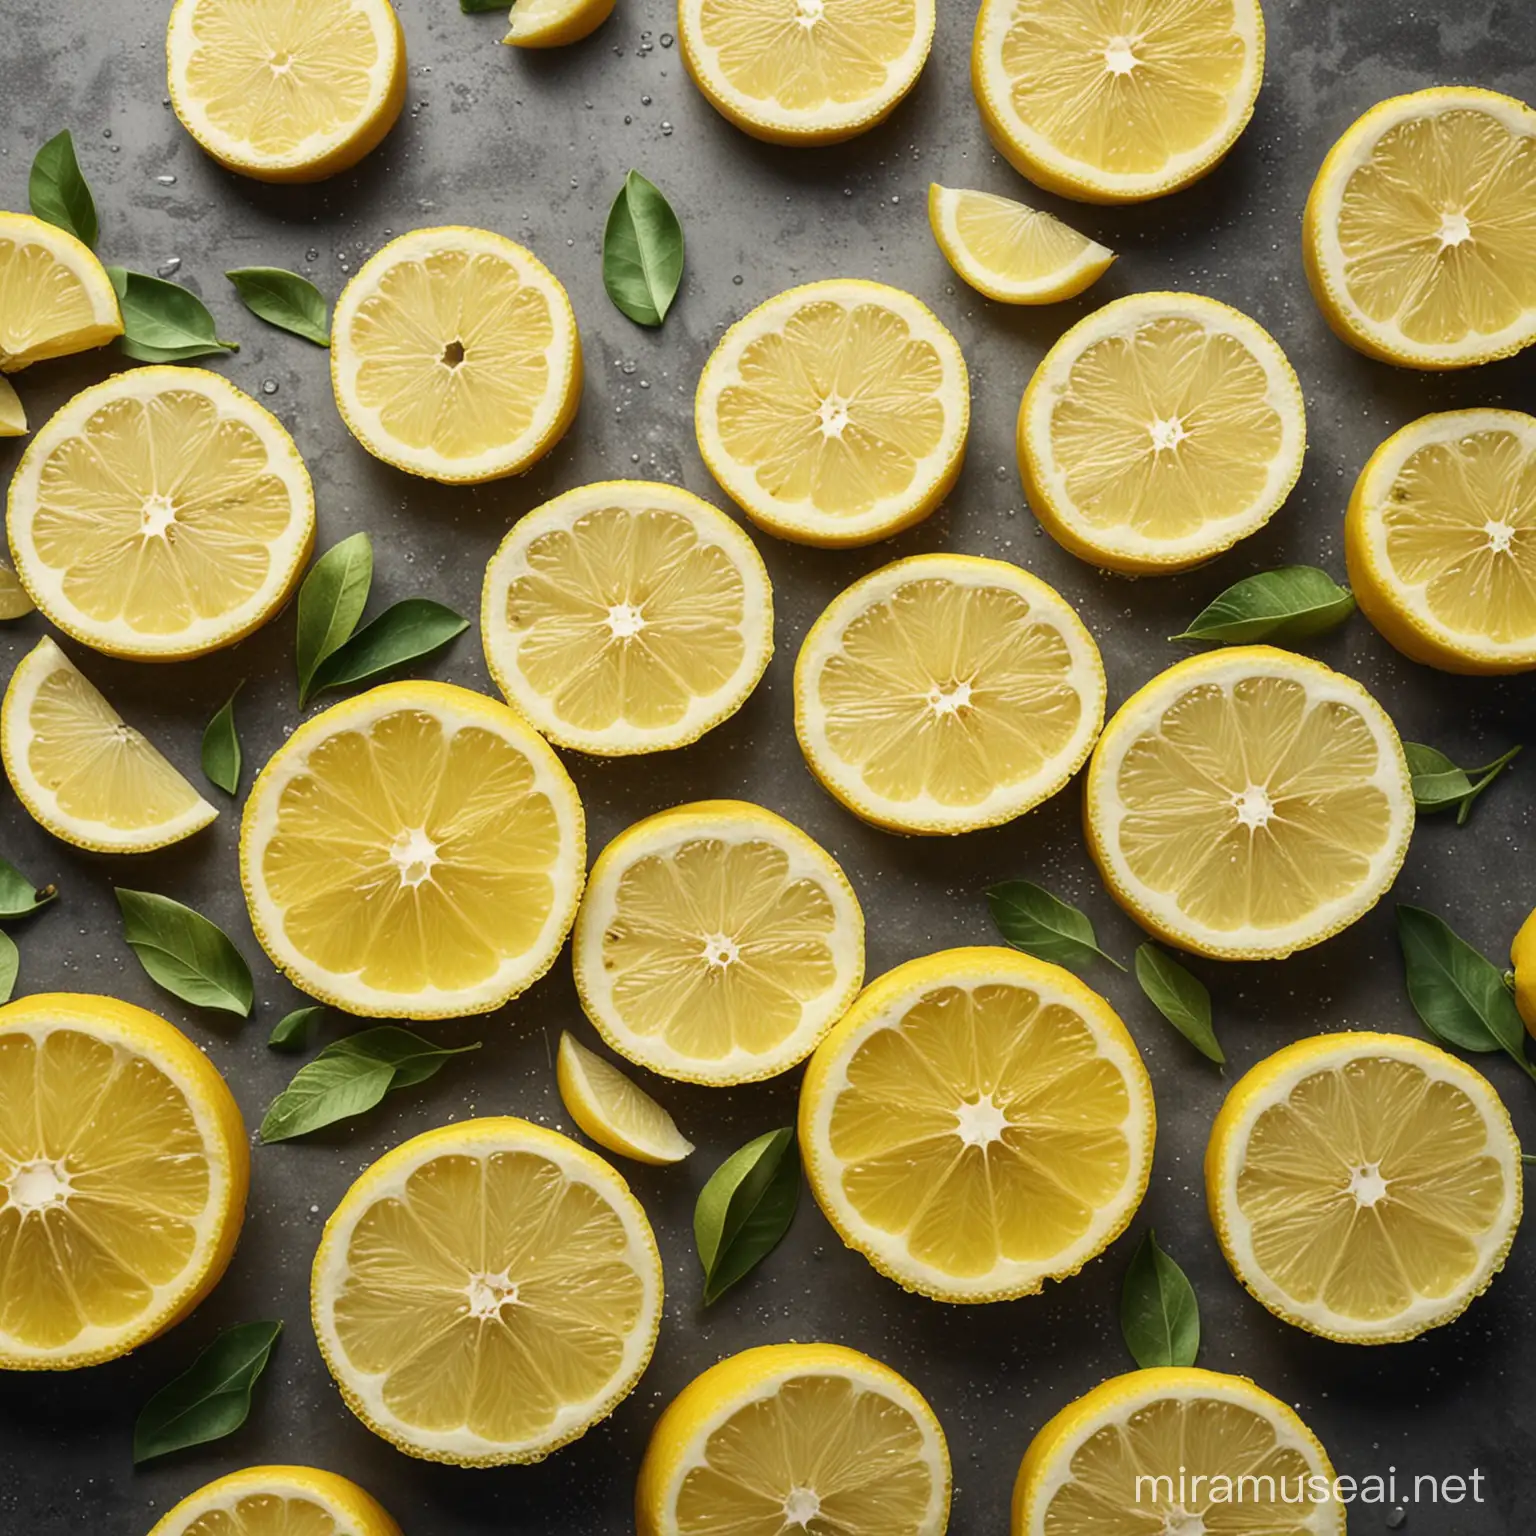 Generate a realistic image of lemon slices . The composition should be visually appealing and evoke a sense of freshness and zestiness. it is summer for lemon
